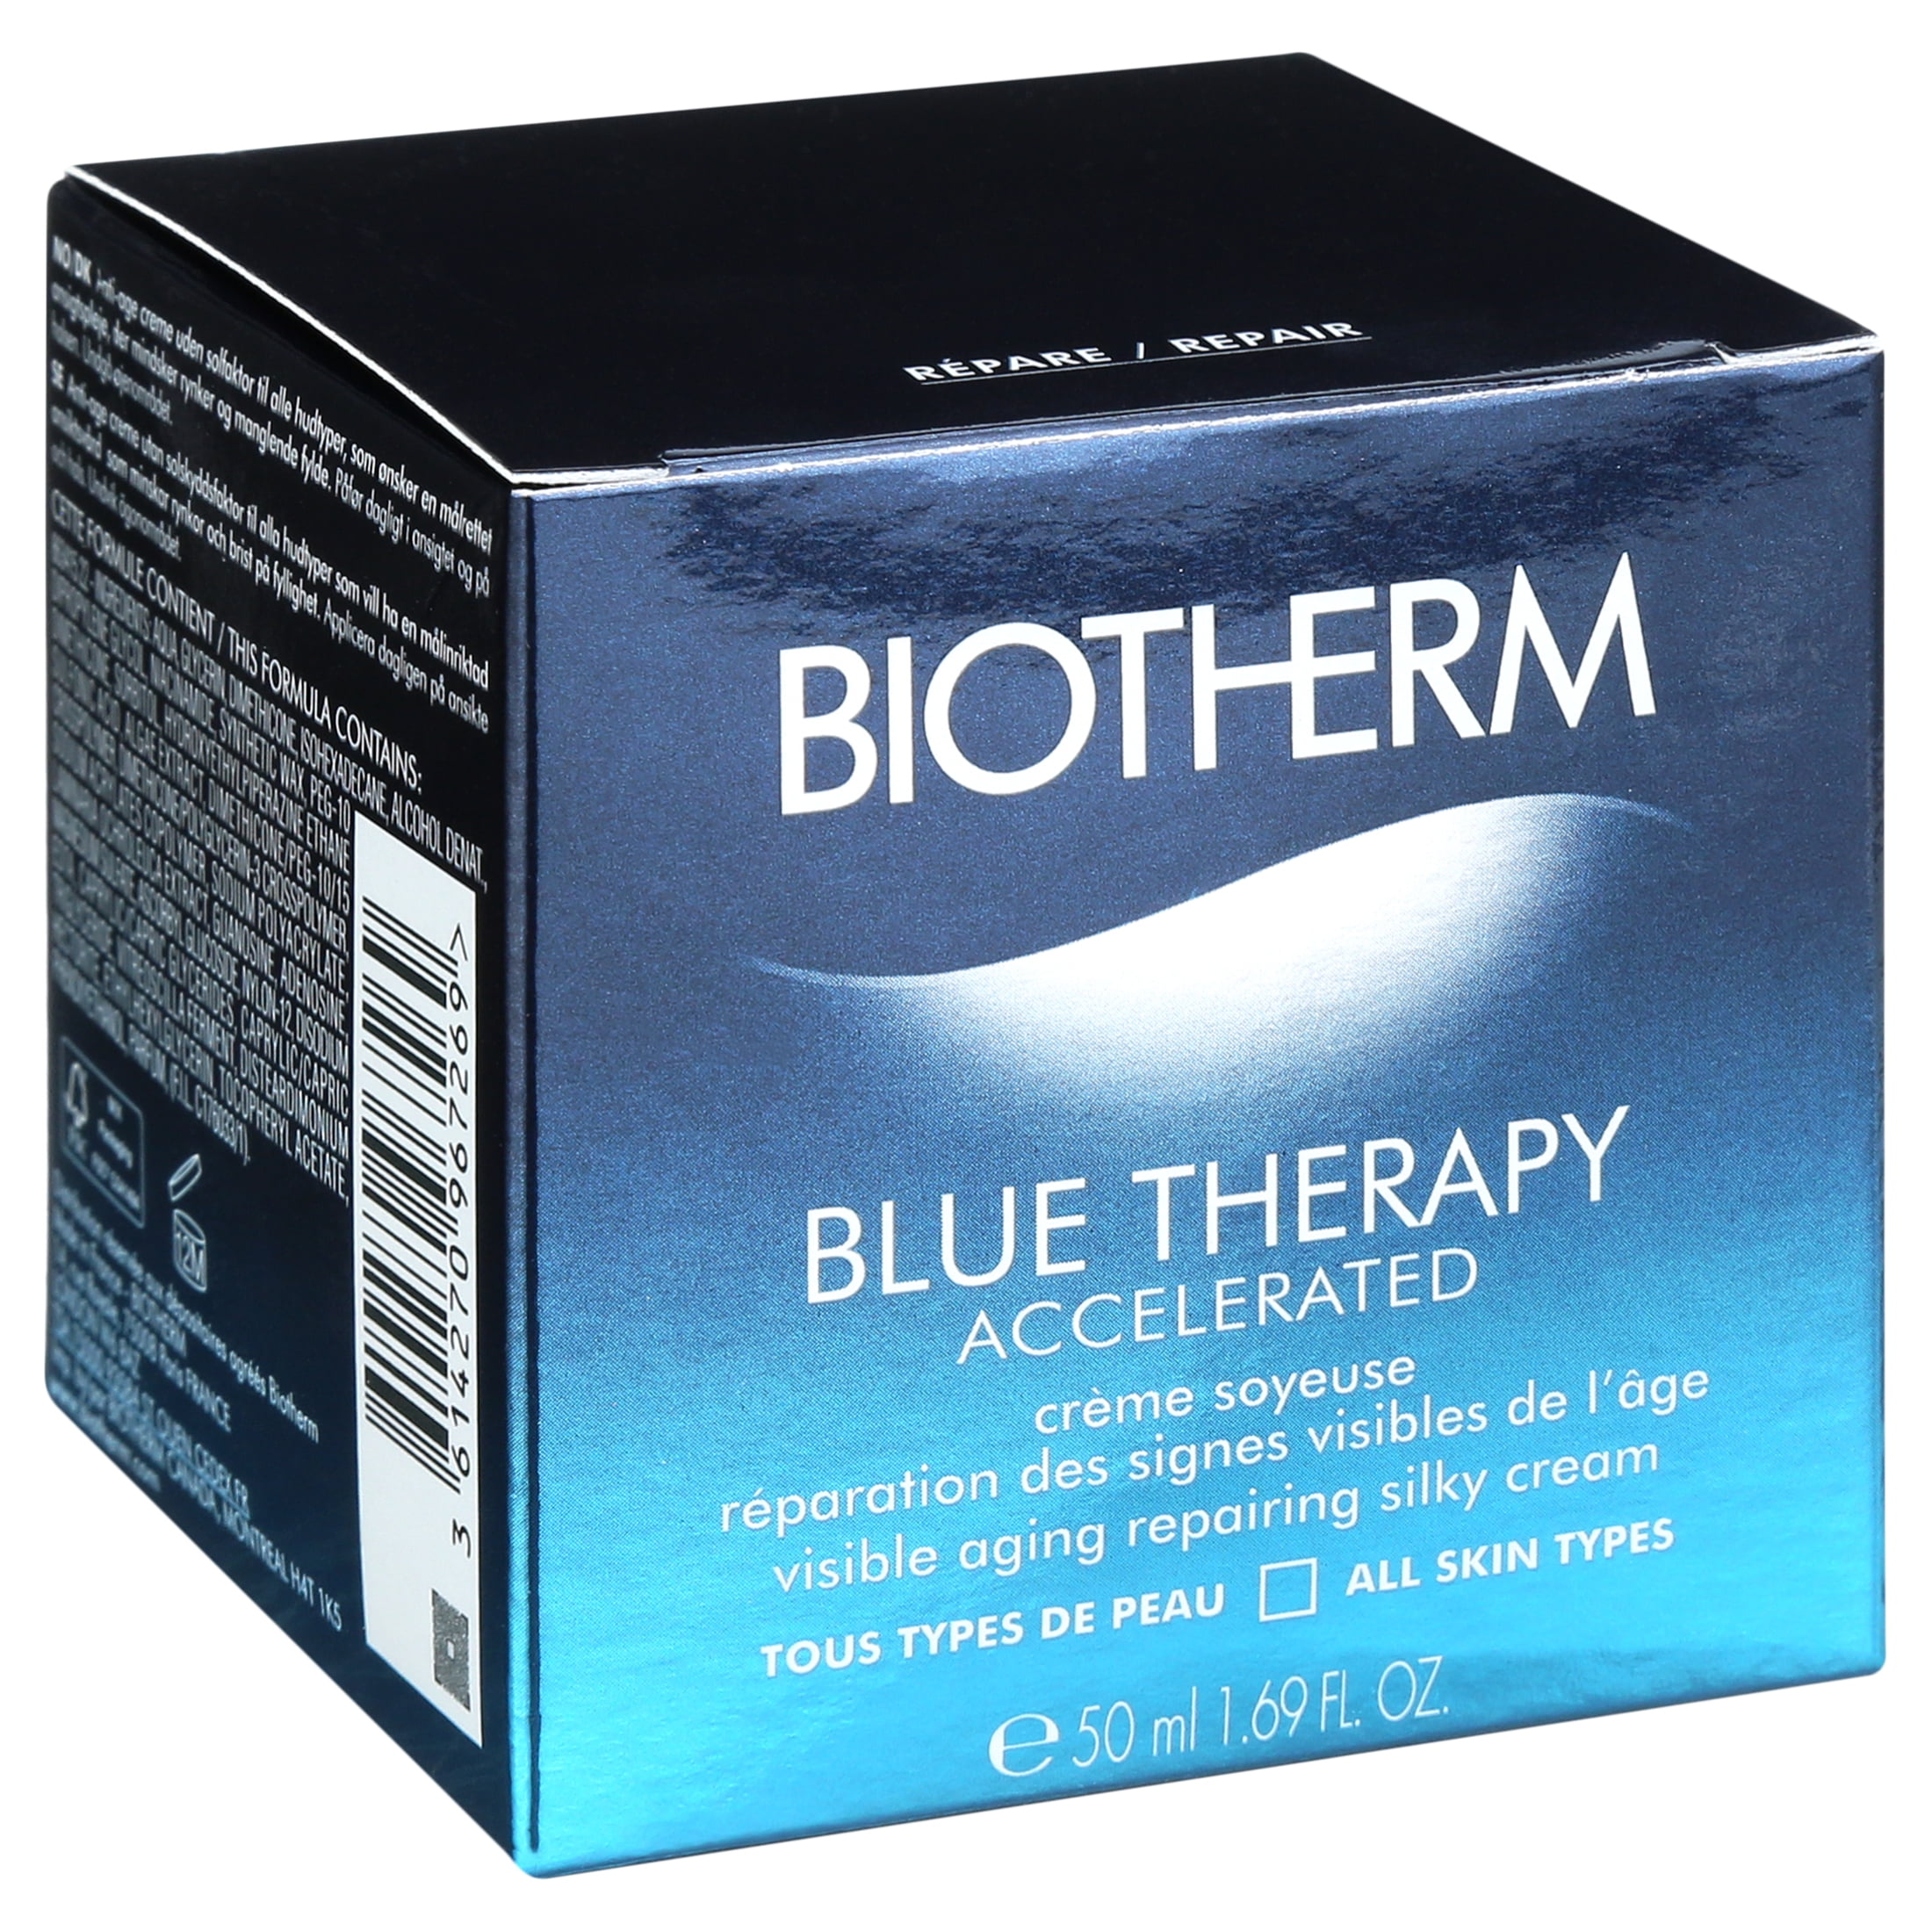 Blue Silky Therapy --50ml/1.69oz Cream Biotherm Accelerated Biotherm Repairing Anti-aging By